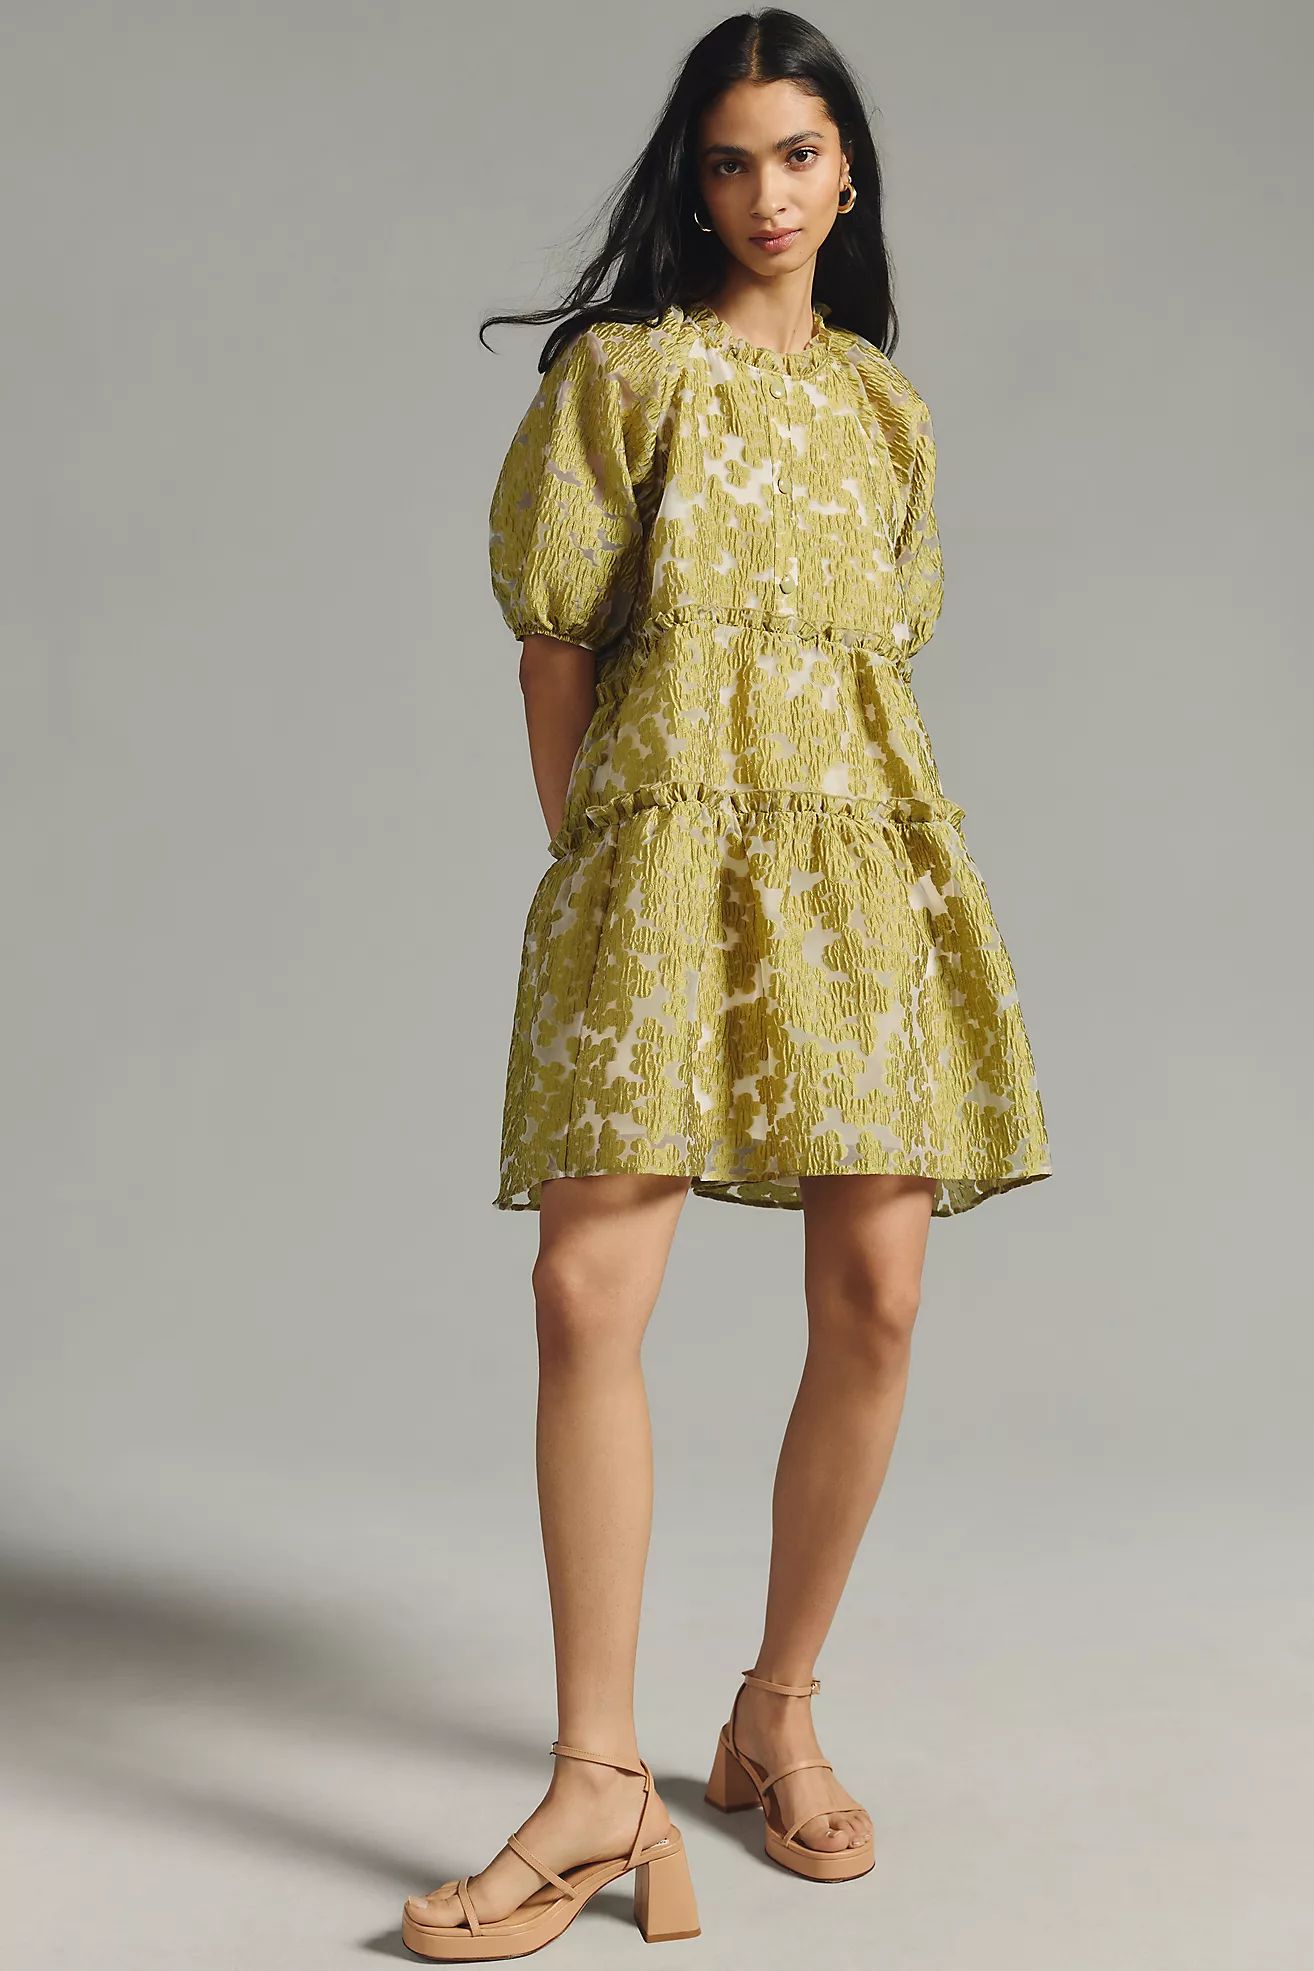 By Anthropologie Tiered Jacquard Dress | Anthropologie (US)